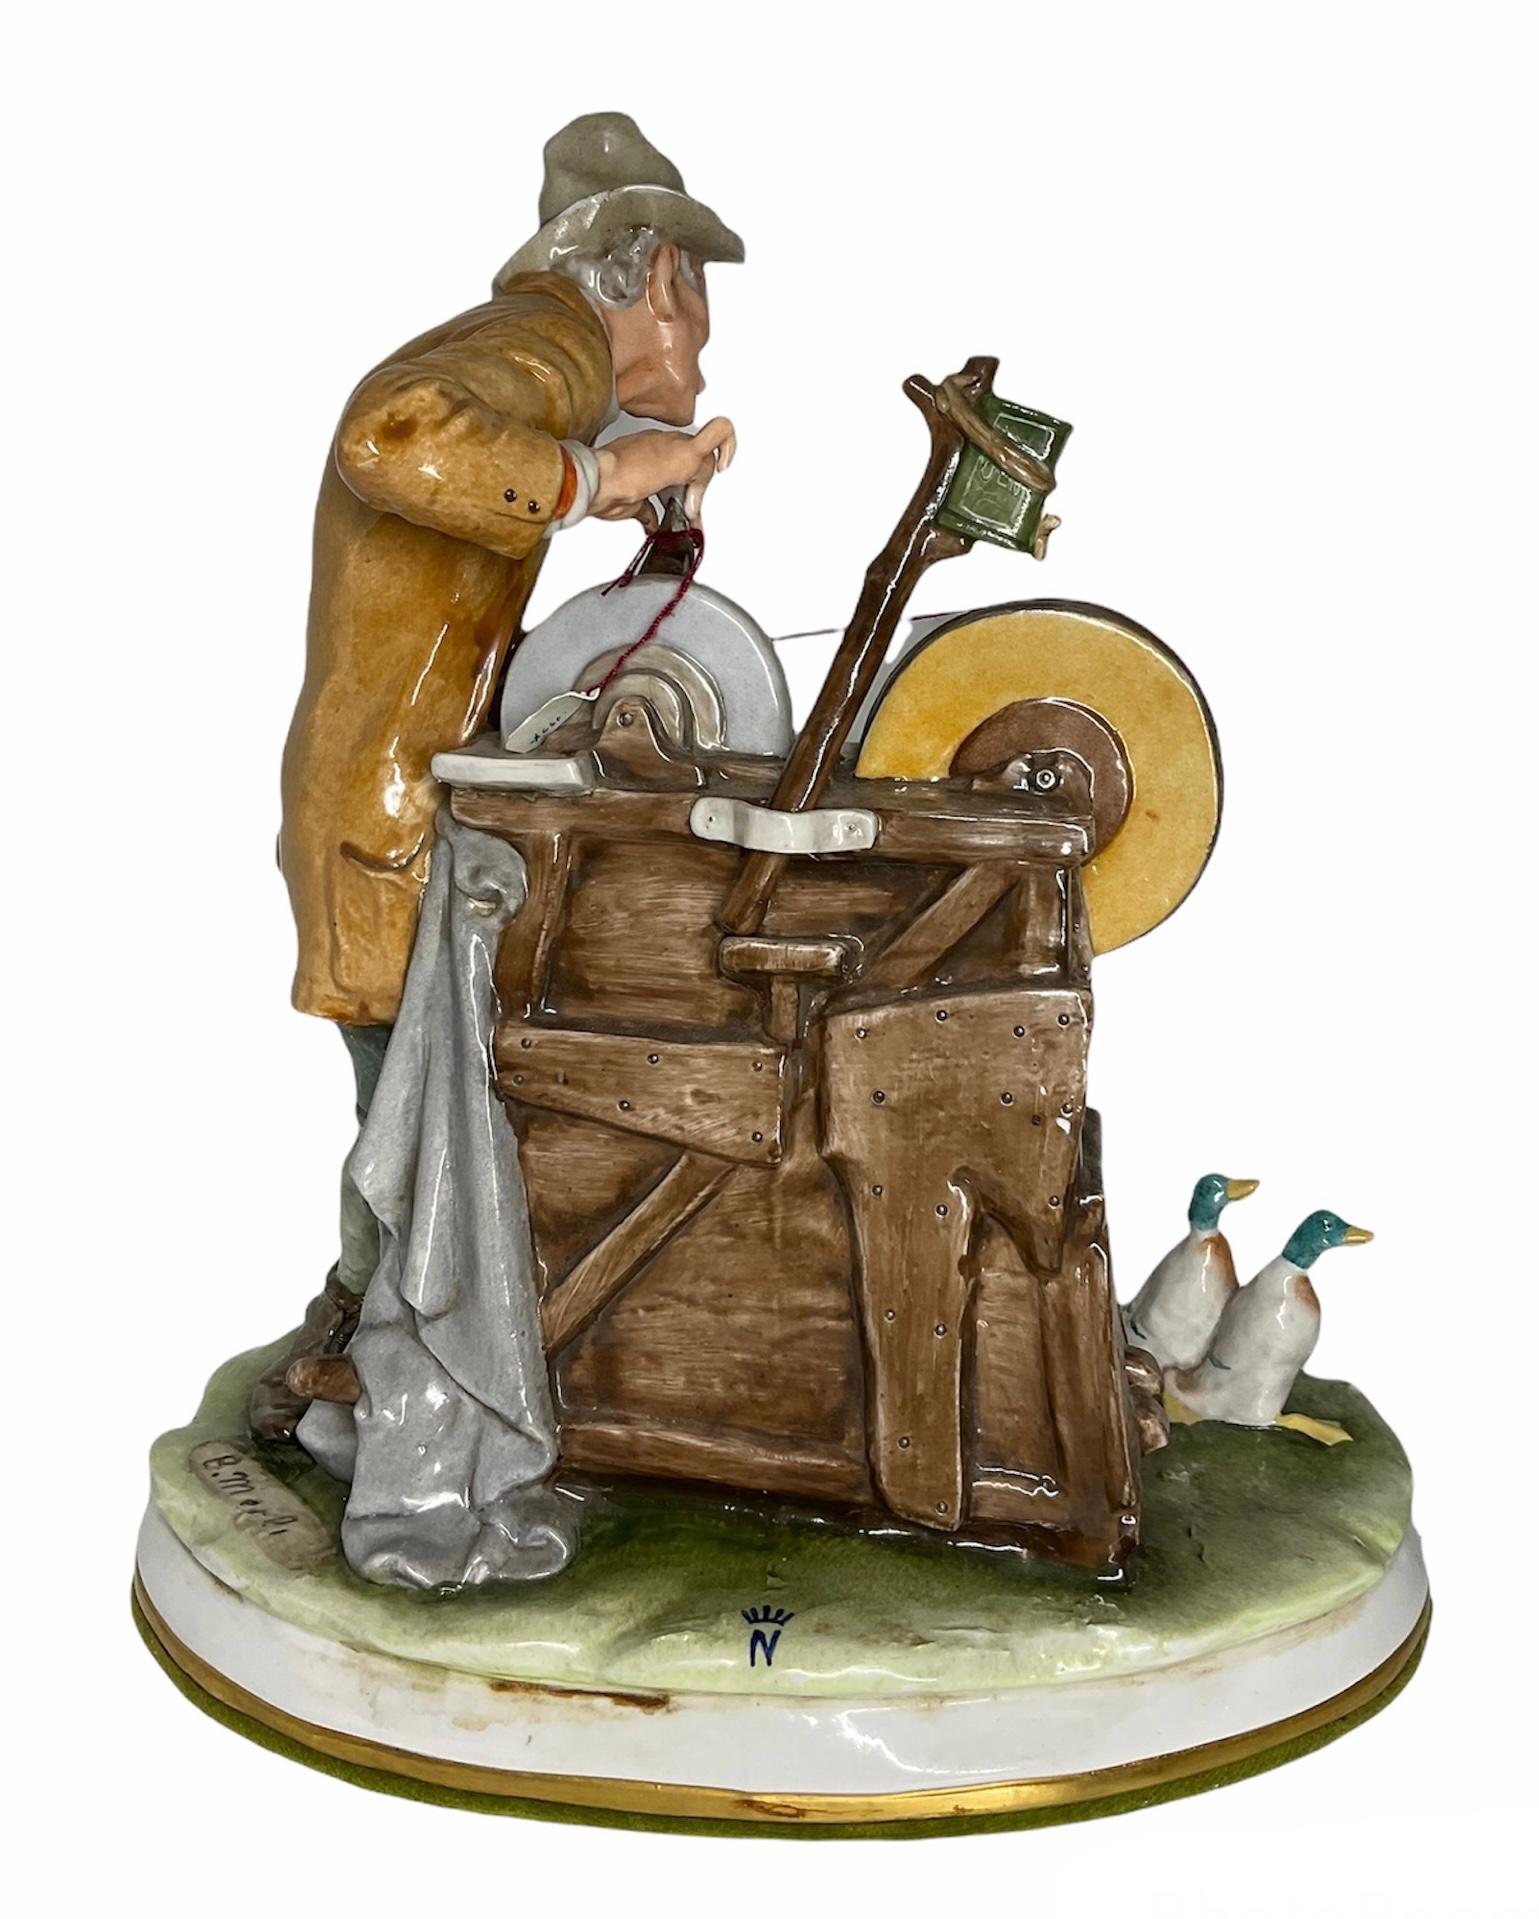 Hand-Painted Capodimonte Porcelain Sculpture of a Knife Sharpener